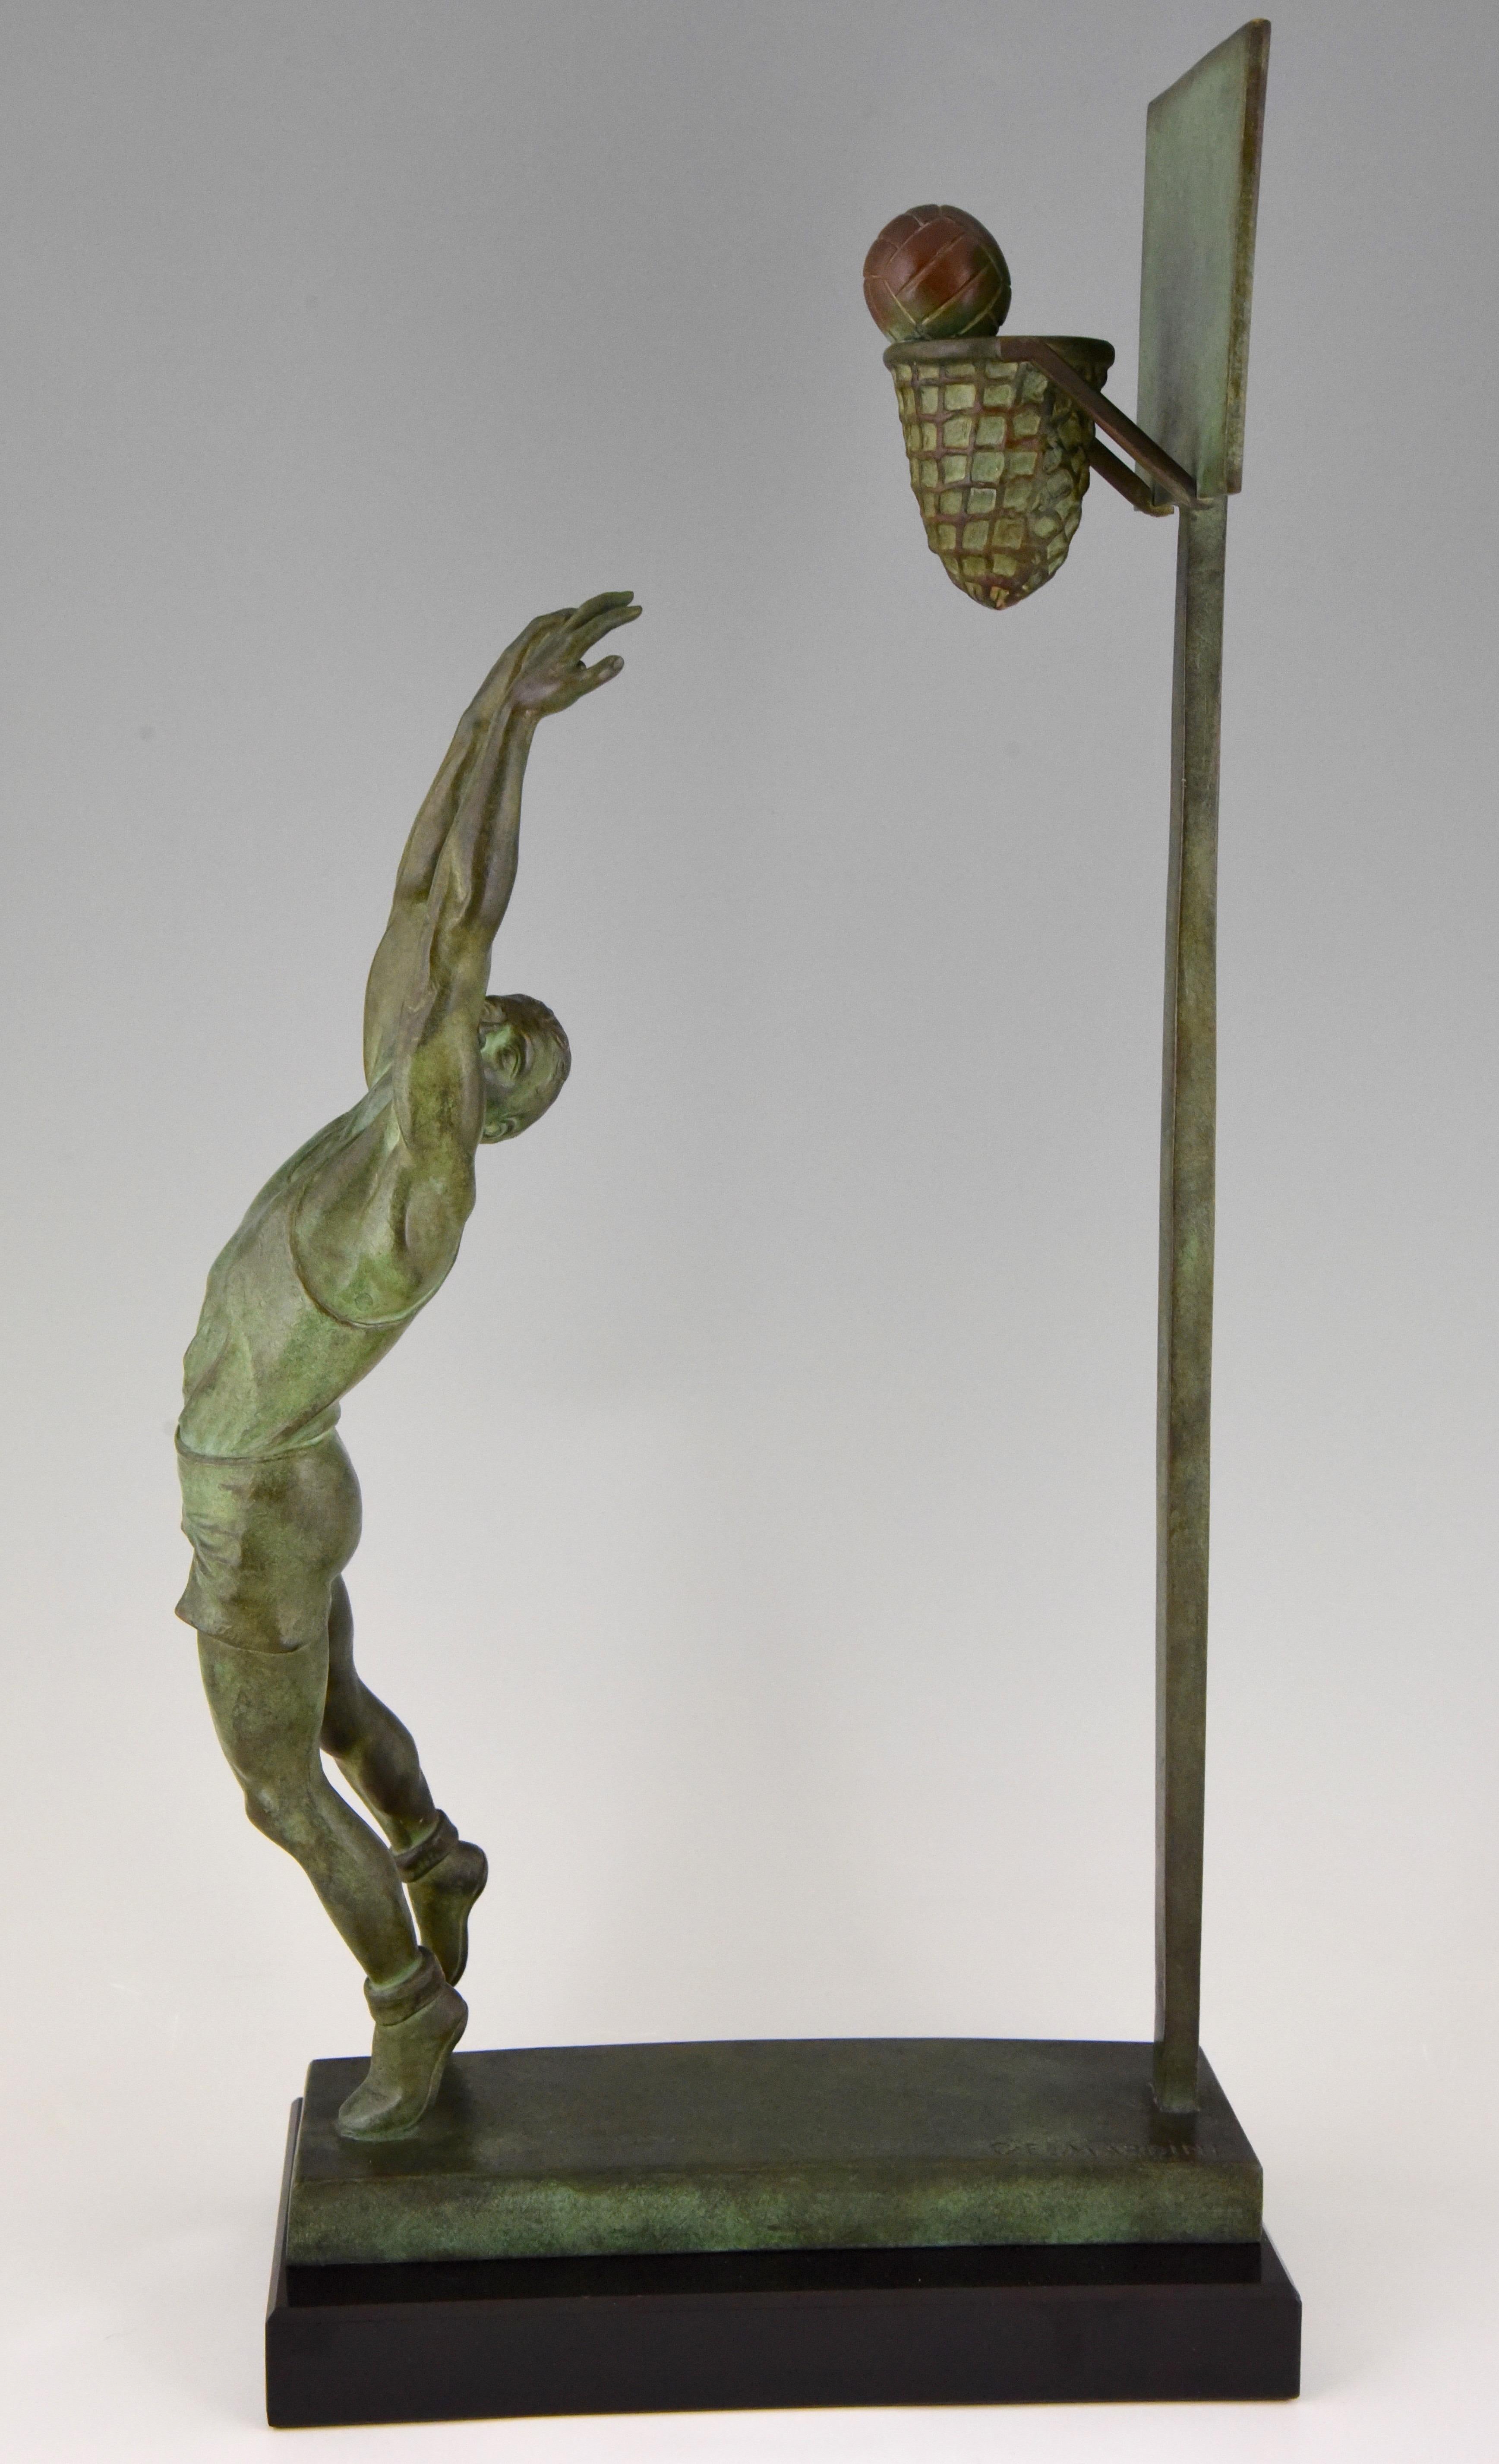 Hard to find Art Deco bronze sculpture of a basketball player doing a reverse dunk. Signed by the artist G.E. Mardini. Beautiful green patina on a Belgian black marble base. France, circa 1930.